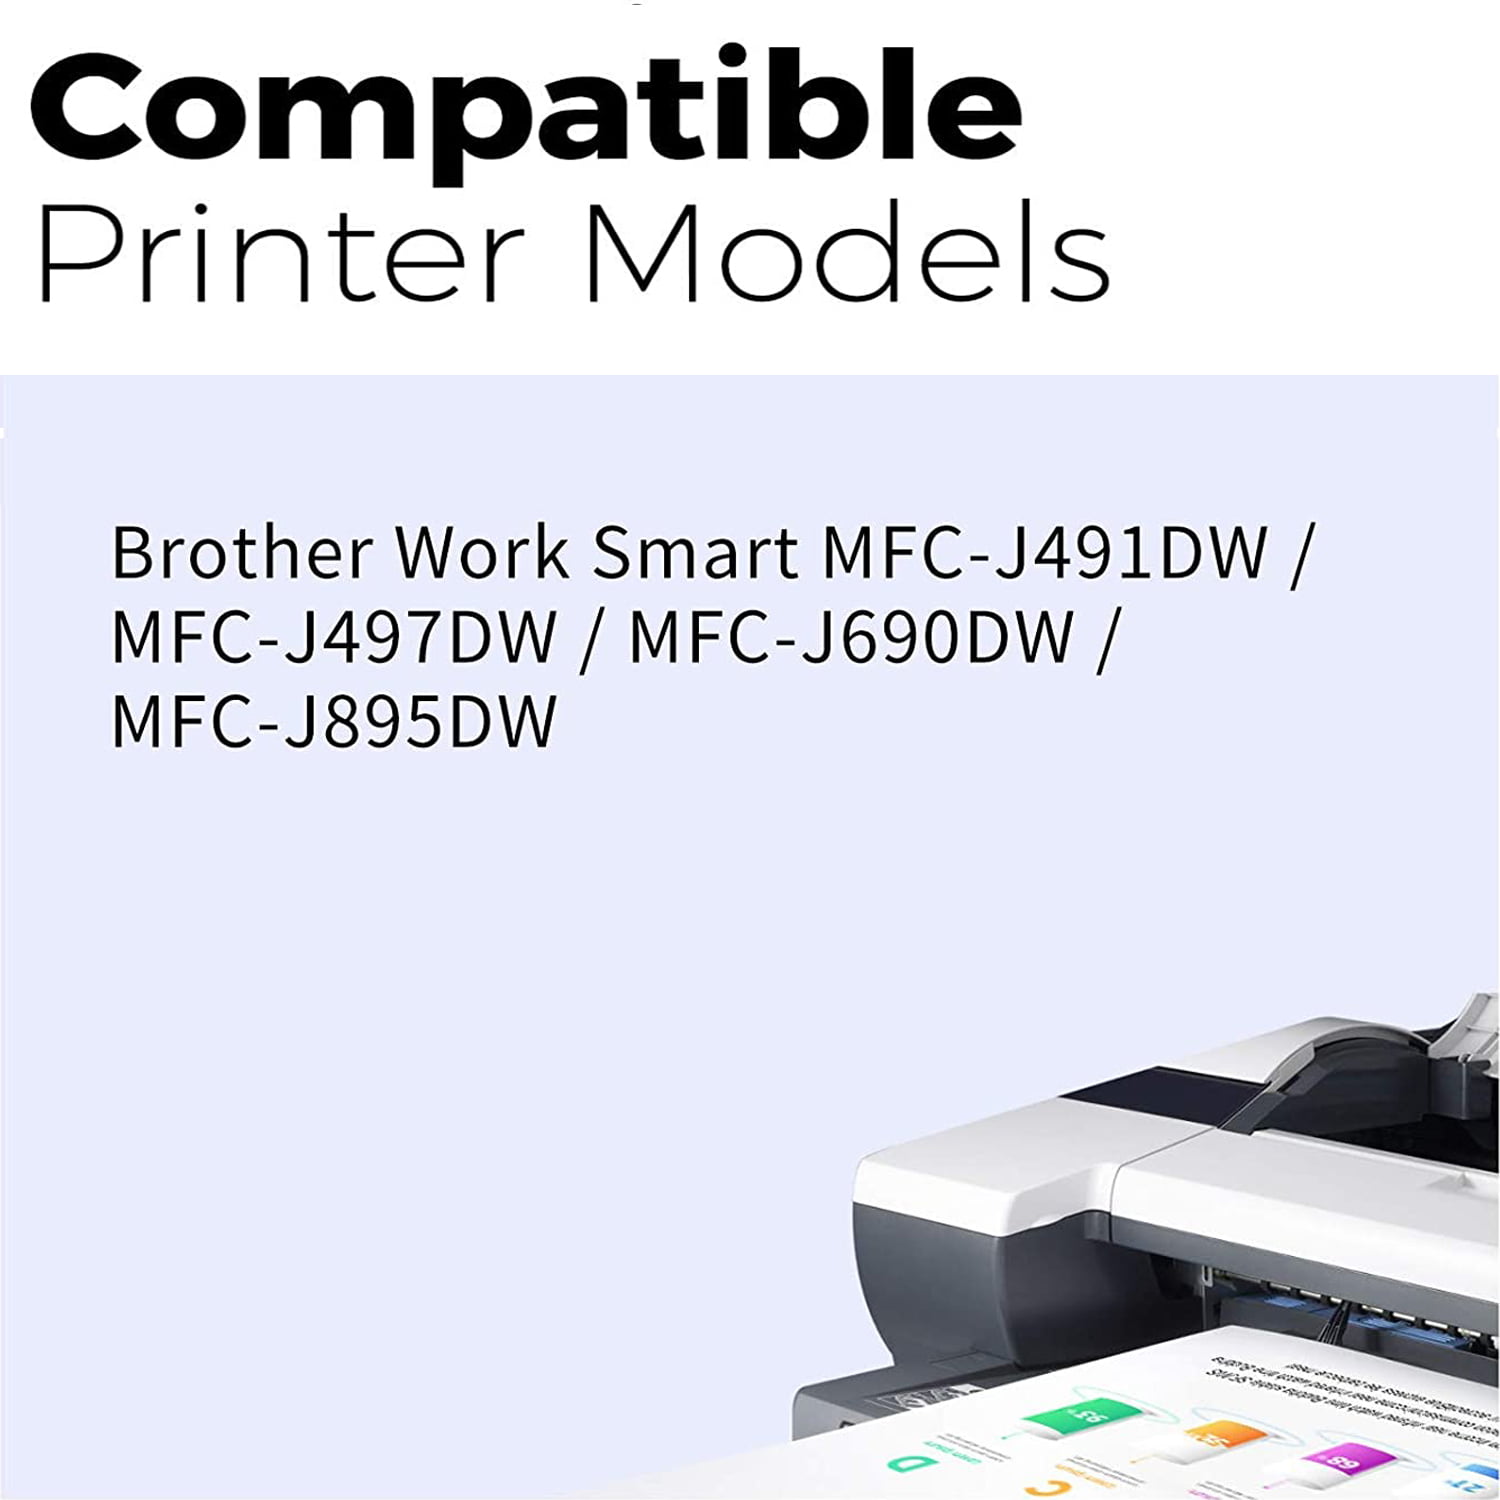 5 Inkfirst Compatible Ink Cartridges LC3013 XL LC3011 Replacement for Brother LC3013 XL LC3011 MFC-J497DW MFC-J690DW MFC-J895DW MFC-J491DW LC3013BK LC3013C LC3013M LC3013Y 